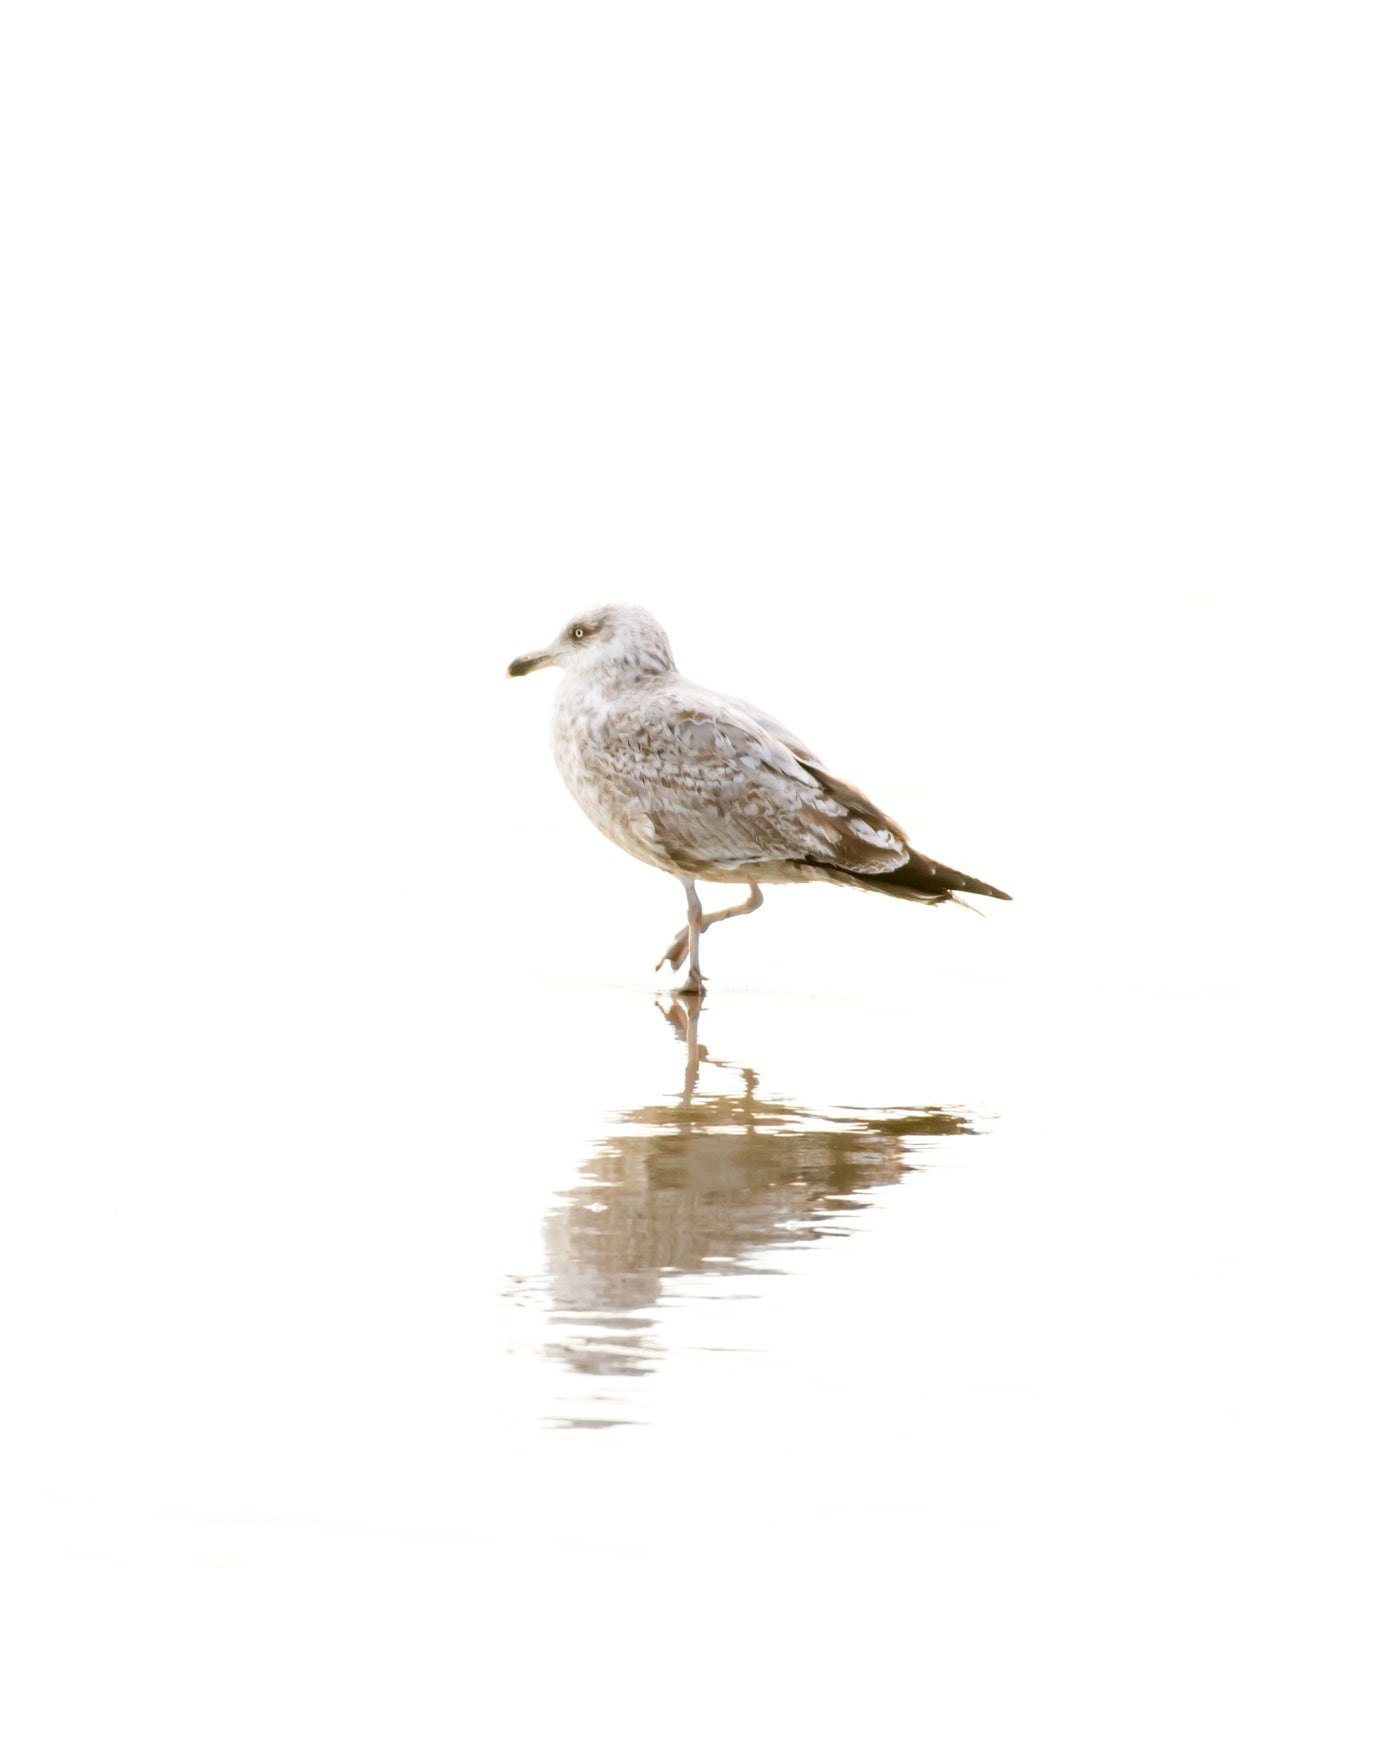 Seagull No 2 - Minimalist bird print by Cattie Coyle Photography